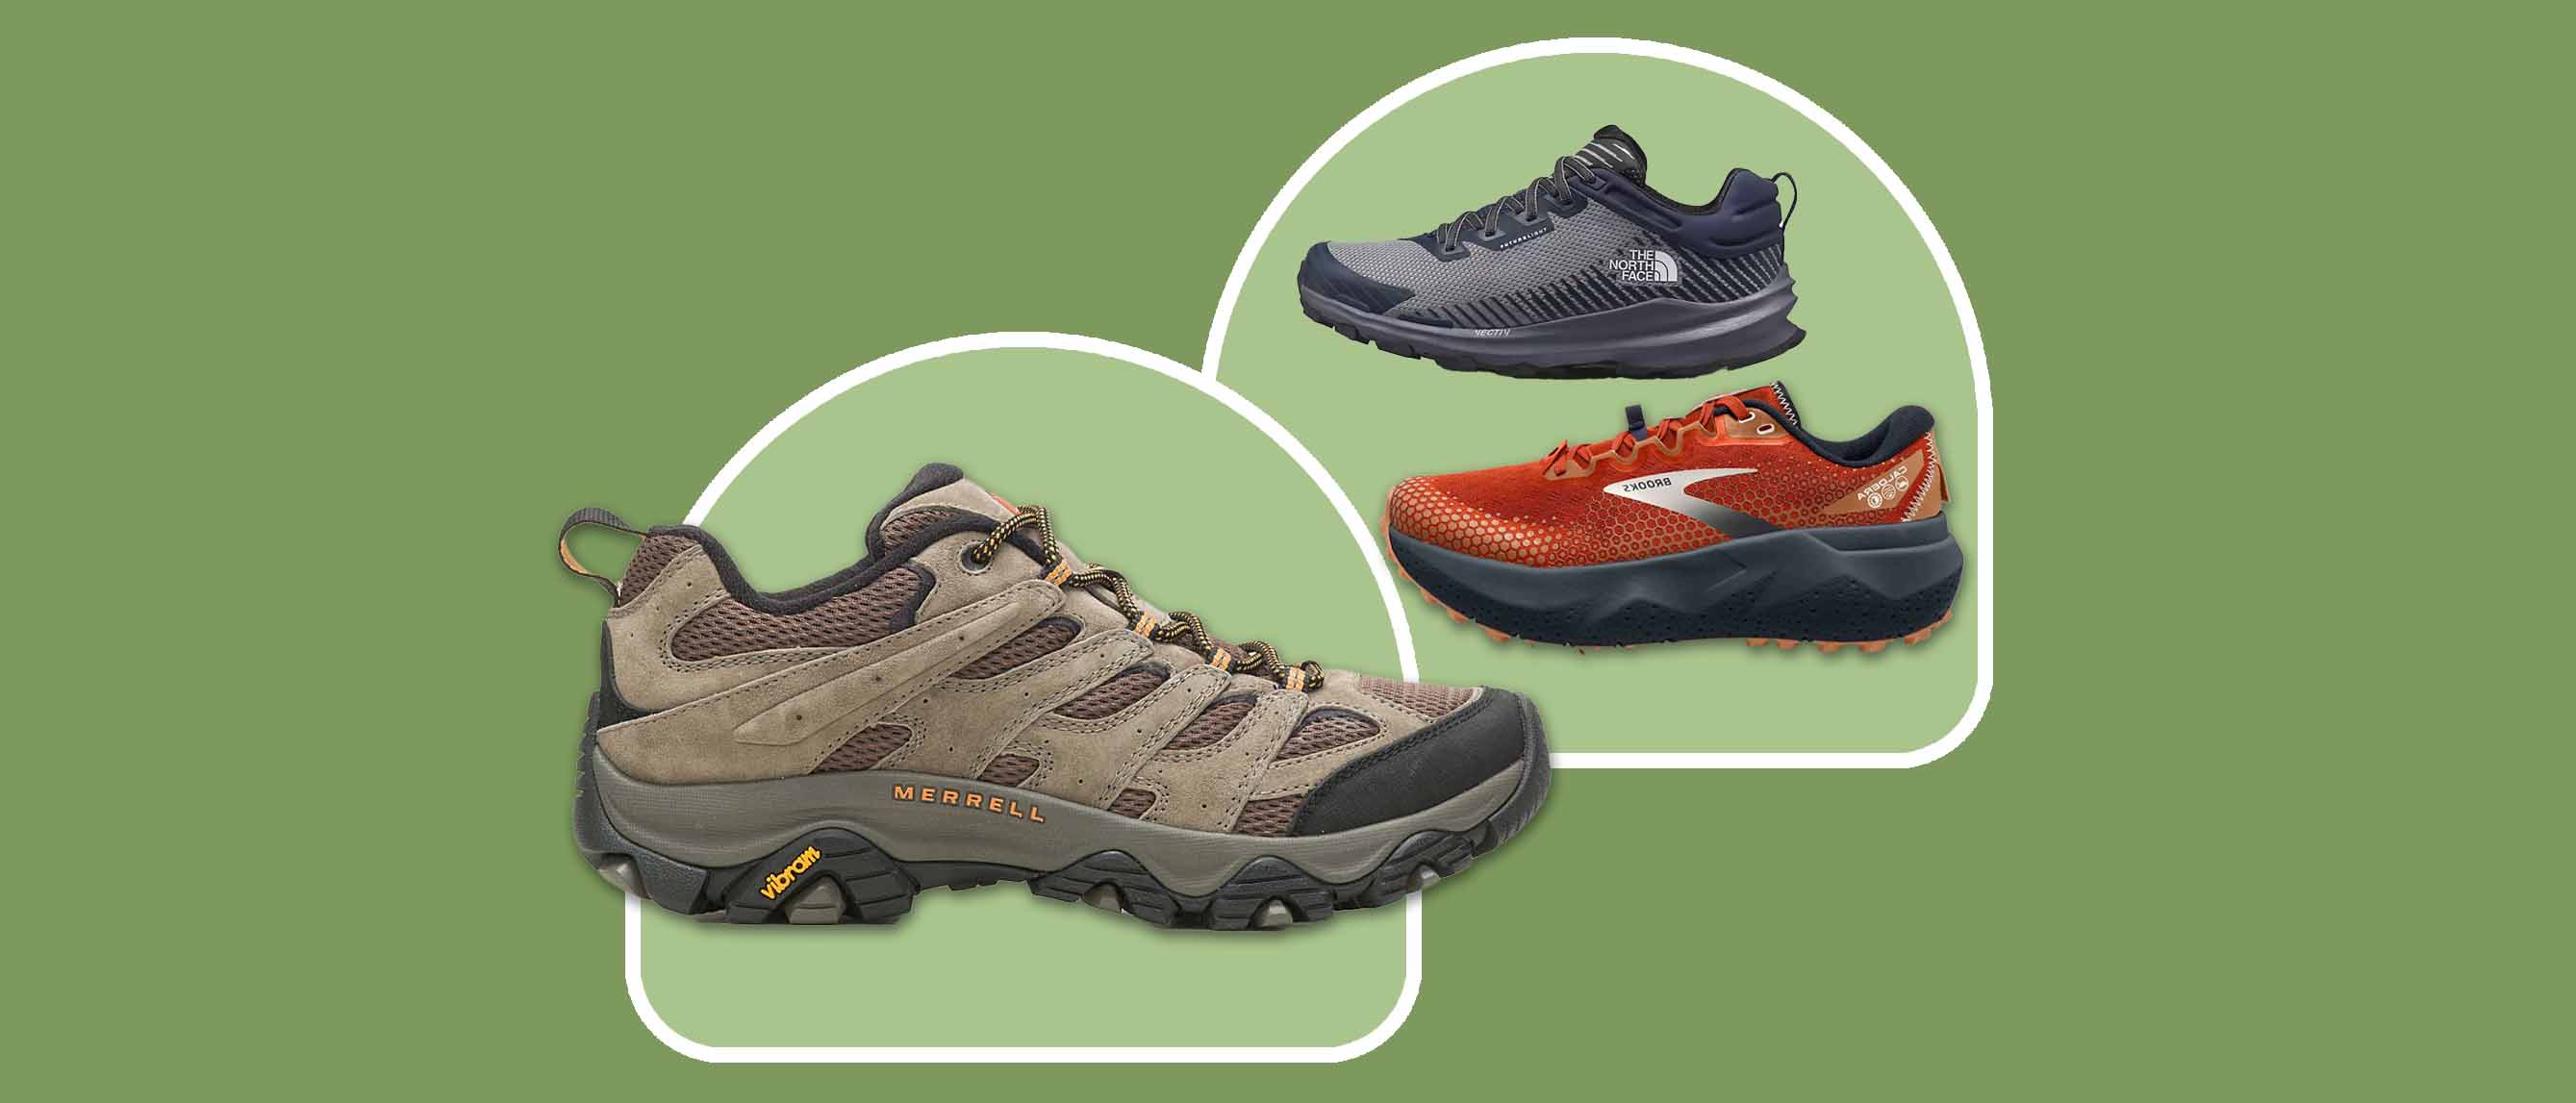 three of the best hiking shoes for men from adidas, Merrell and North Face